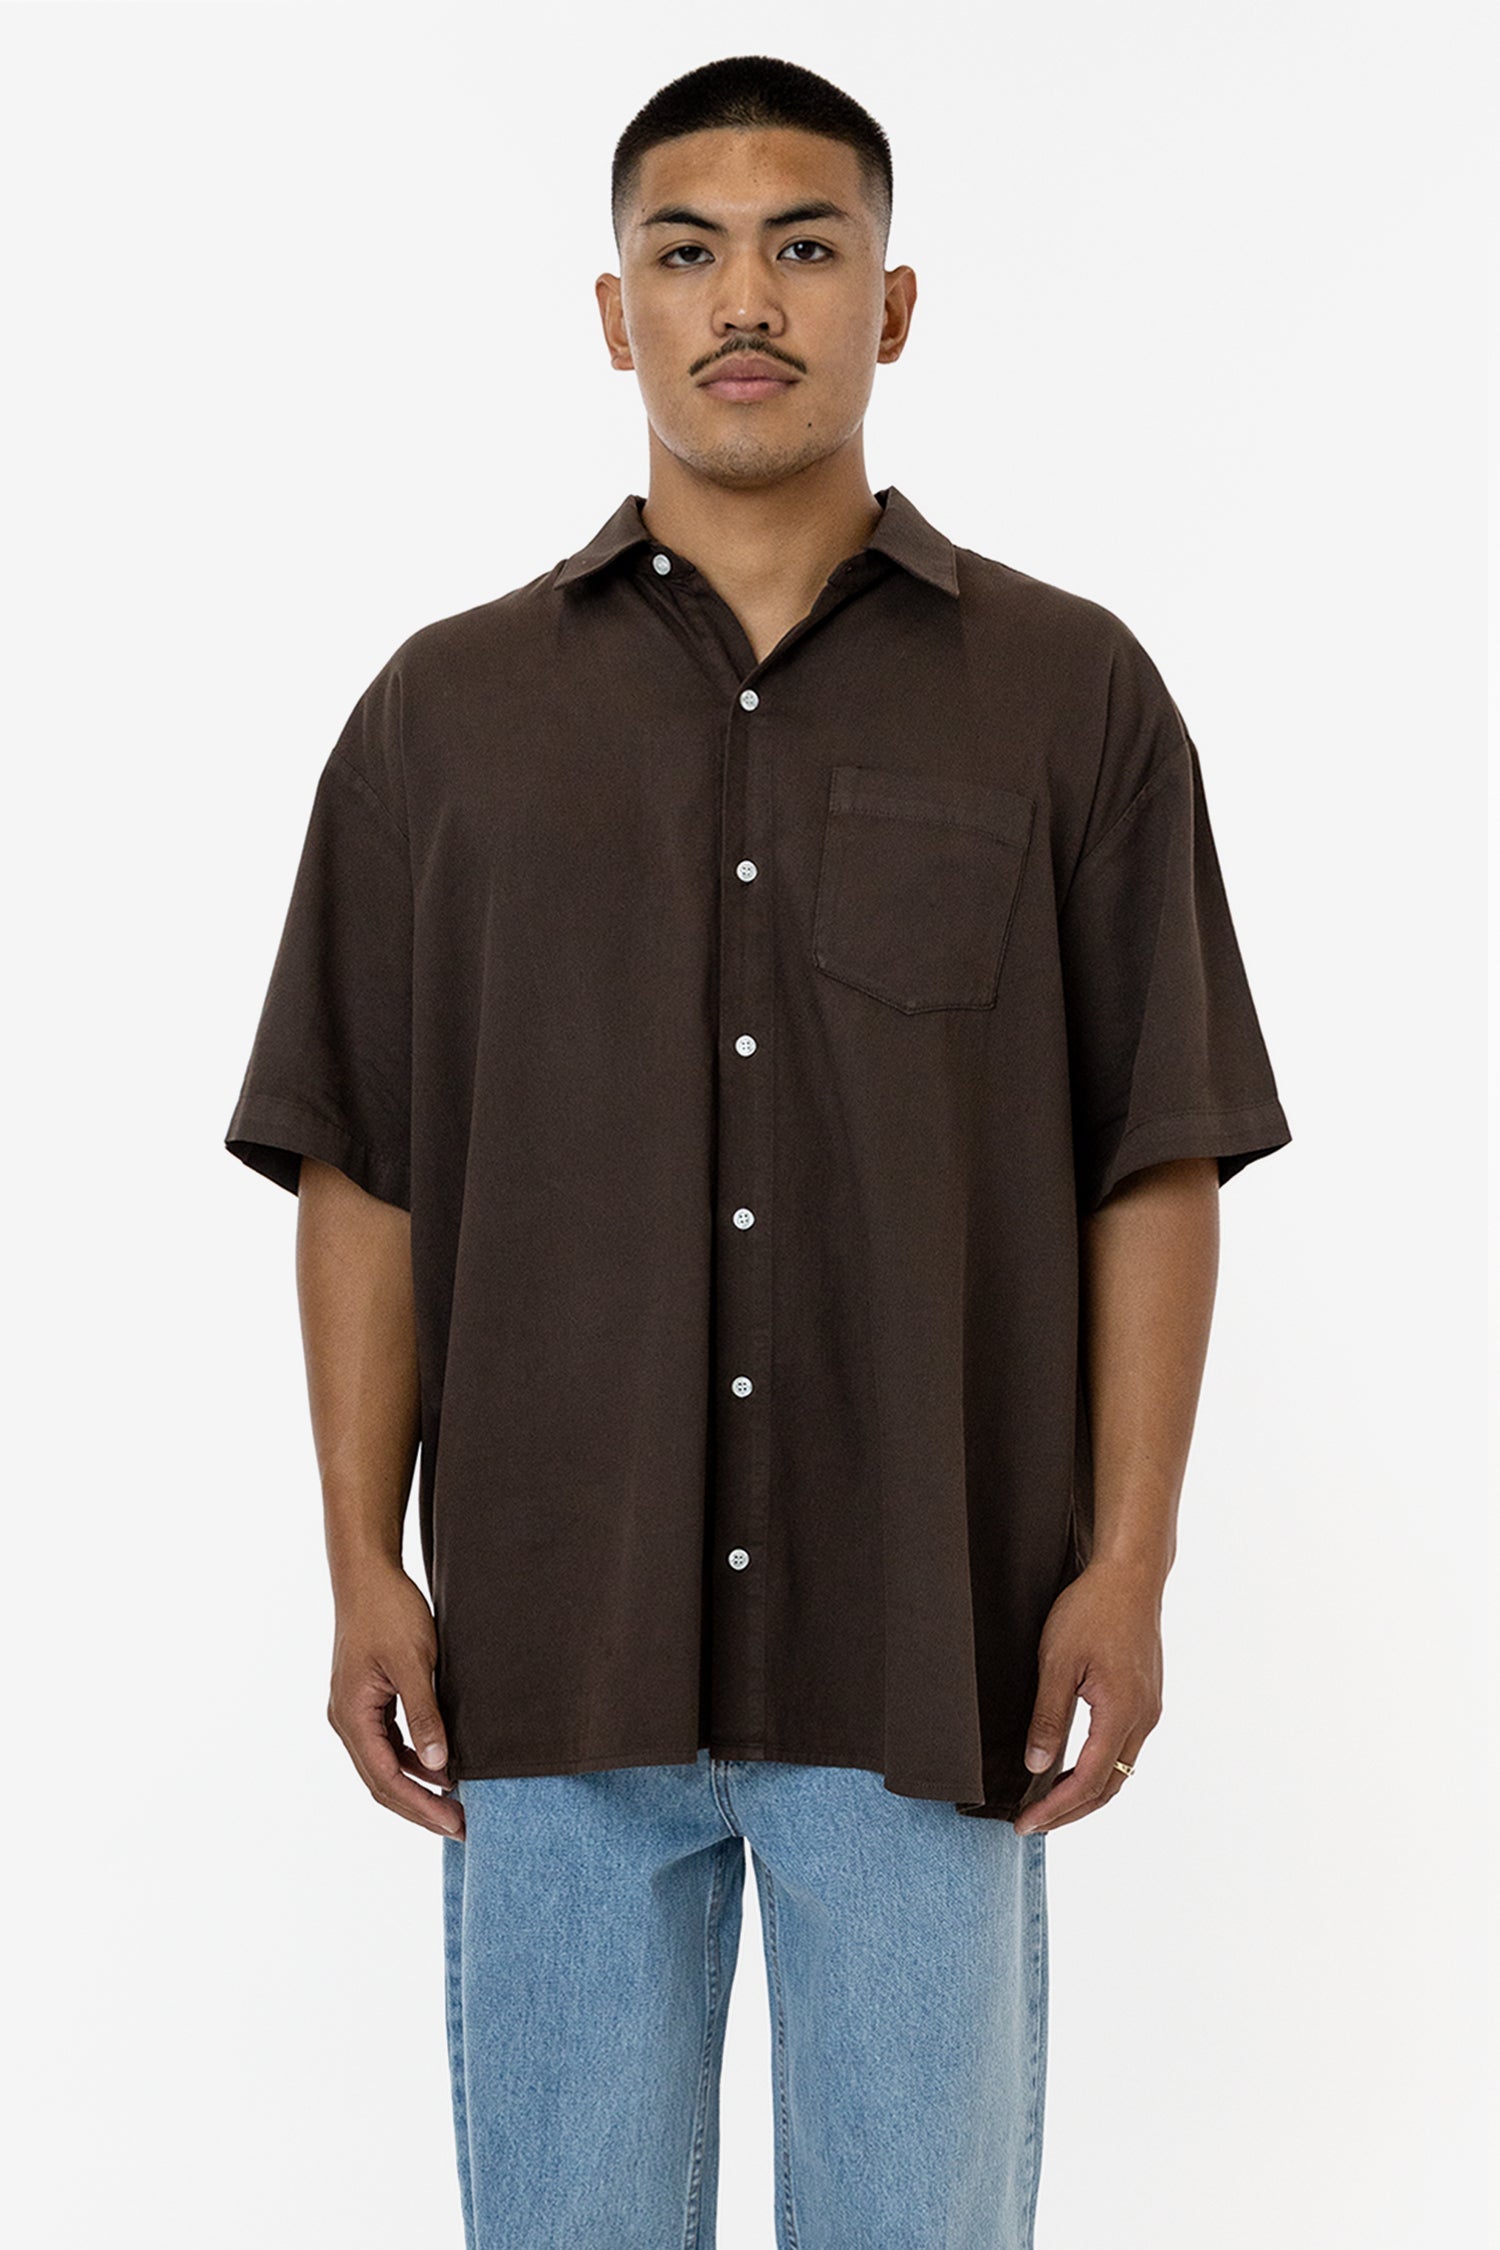 Los Angeles Apparel | Cotton Twill Casual Button Up Shirt in Chocolate, Size Small